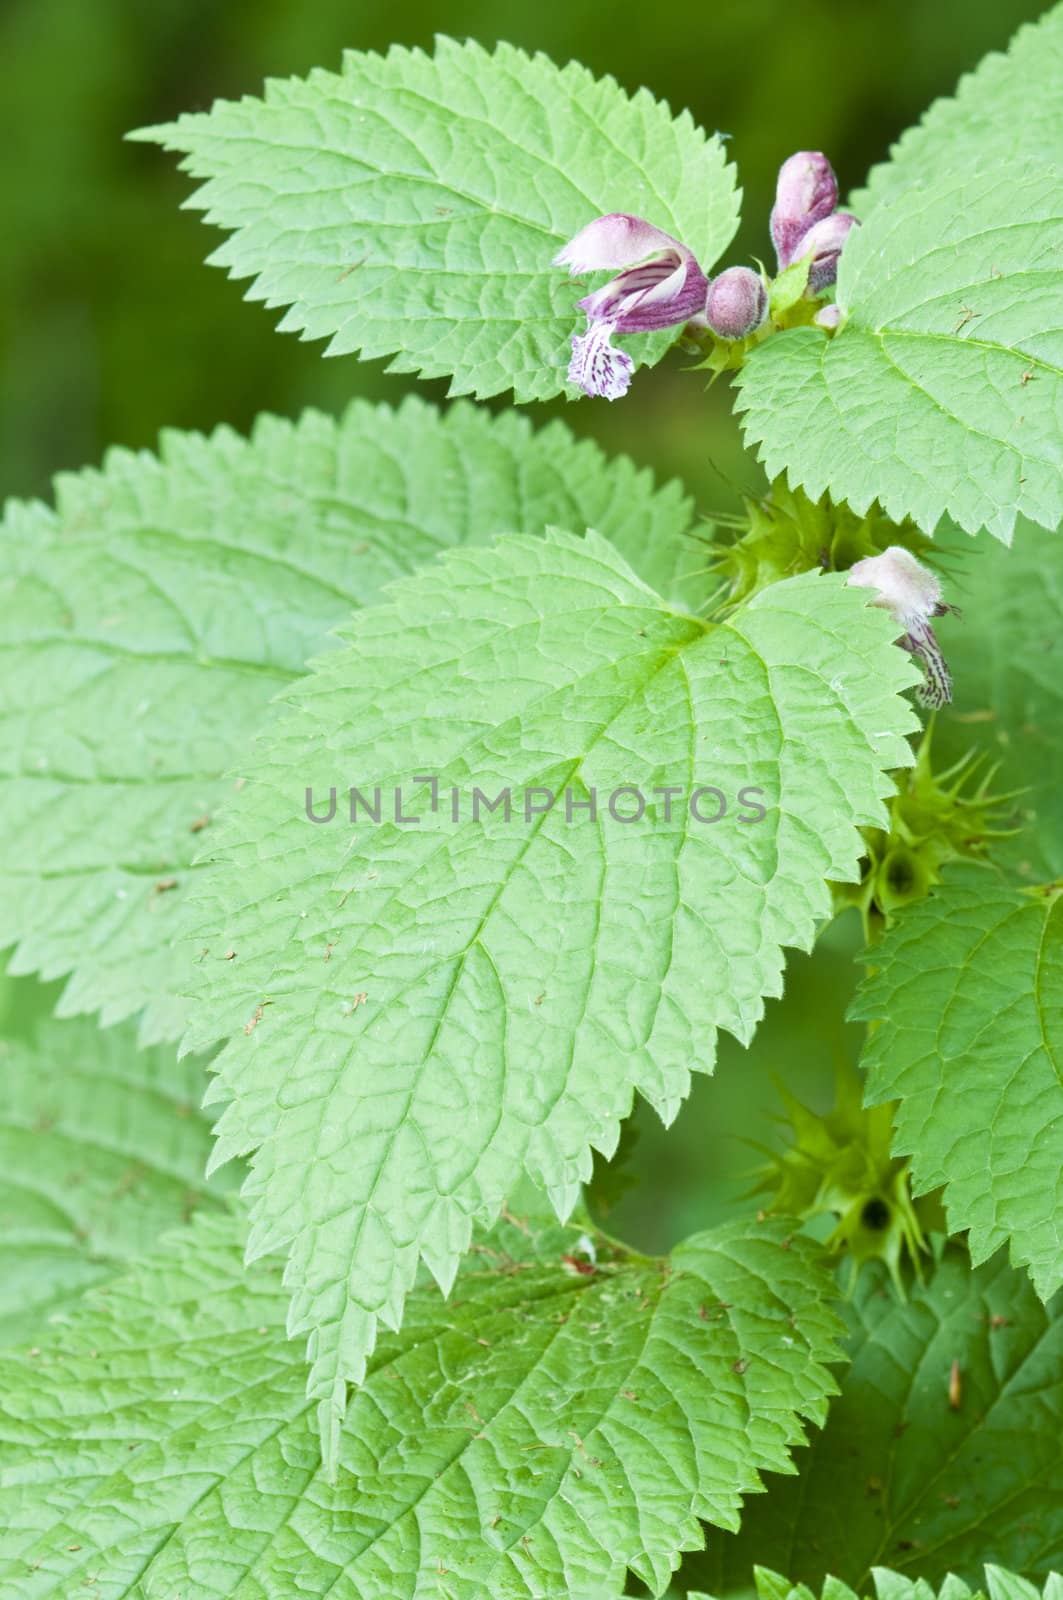 Stinging nettle flowers and leaves